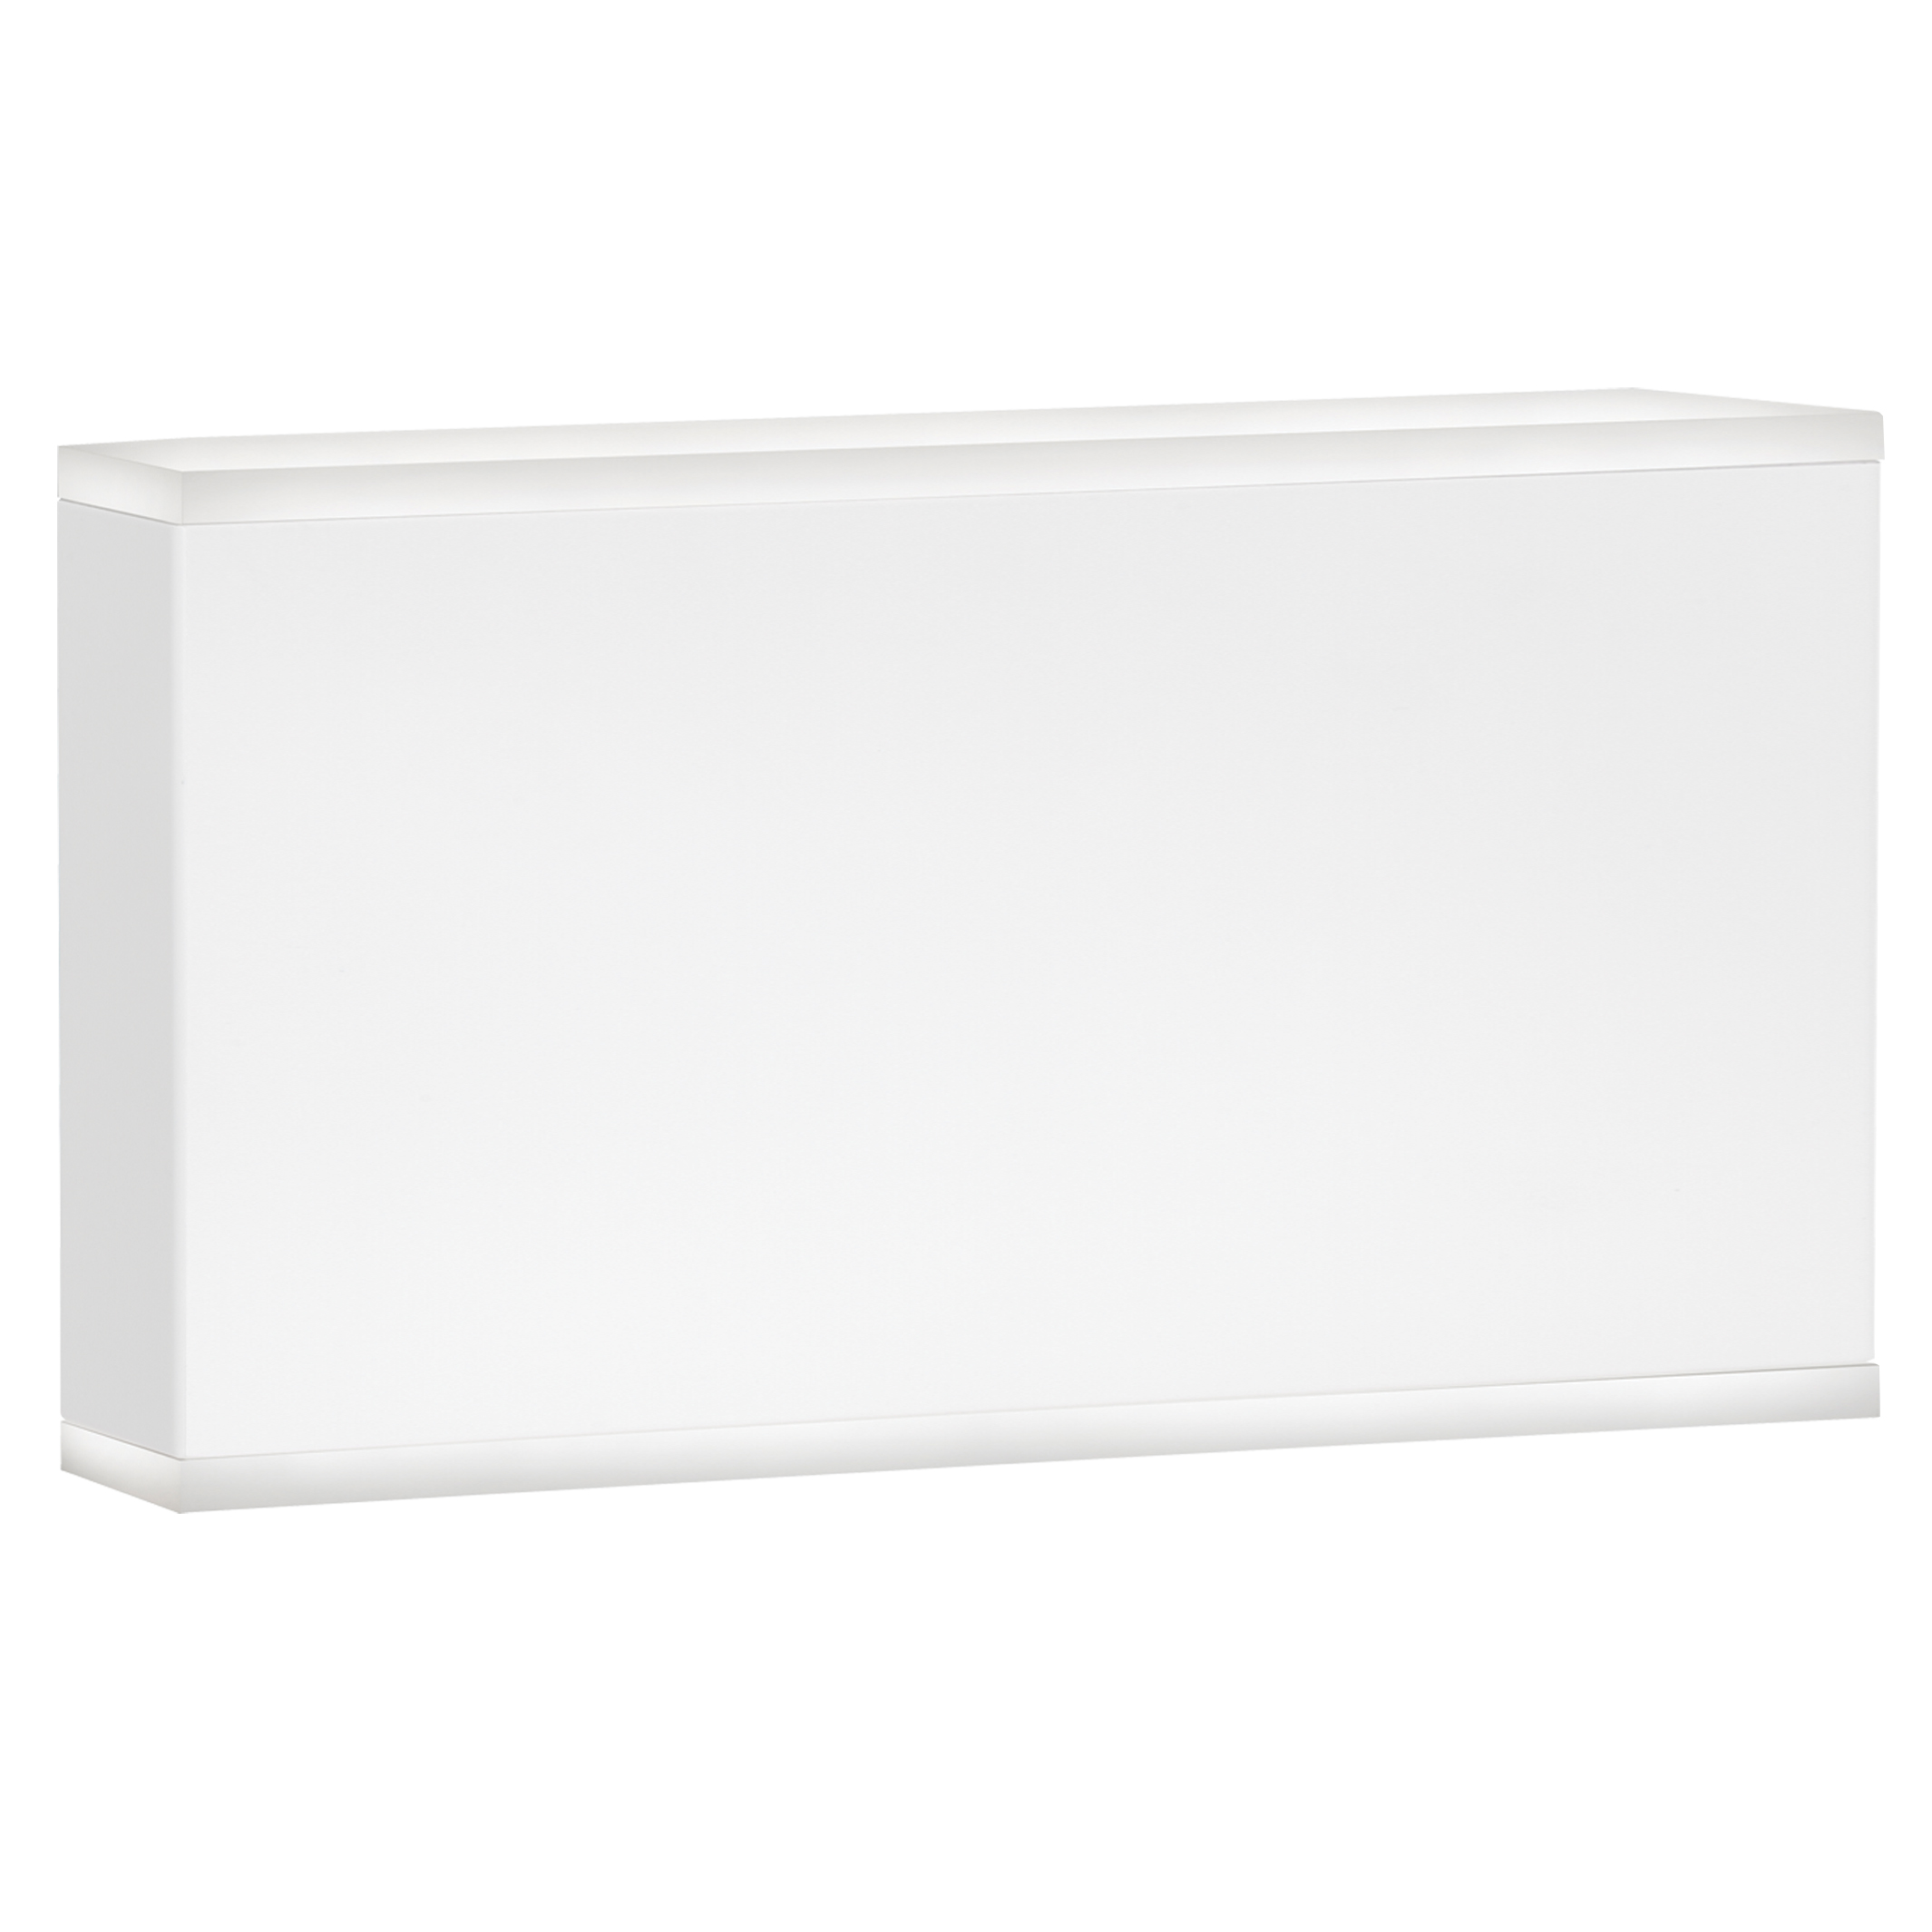 20W Wall Sconce, Matte White with Frosted Acrylic Diffuser